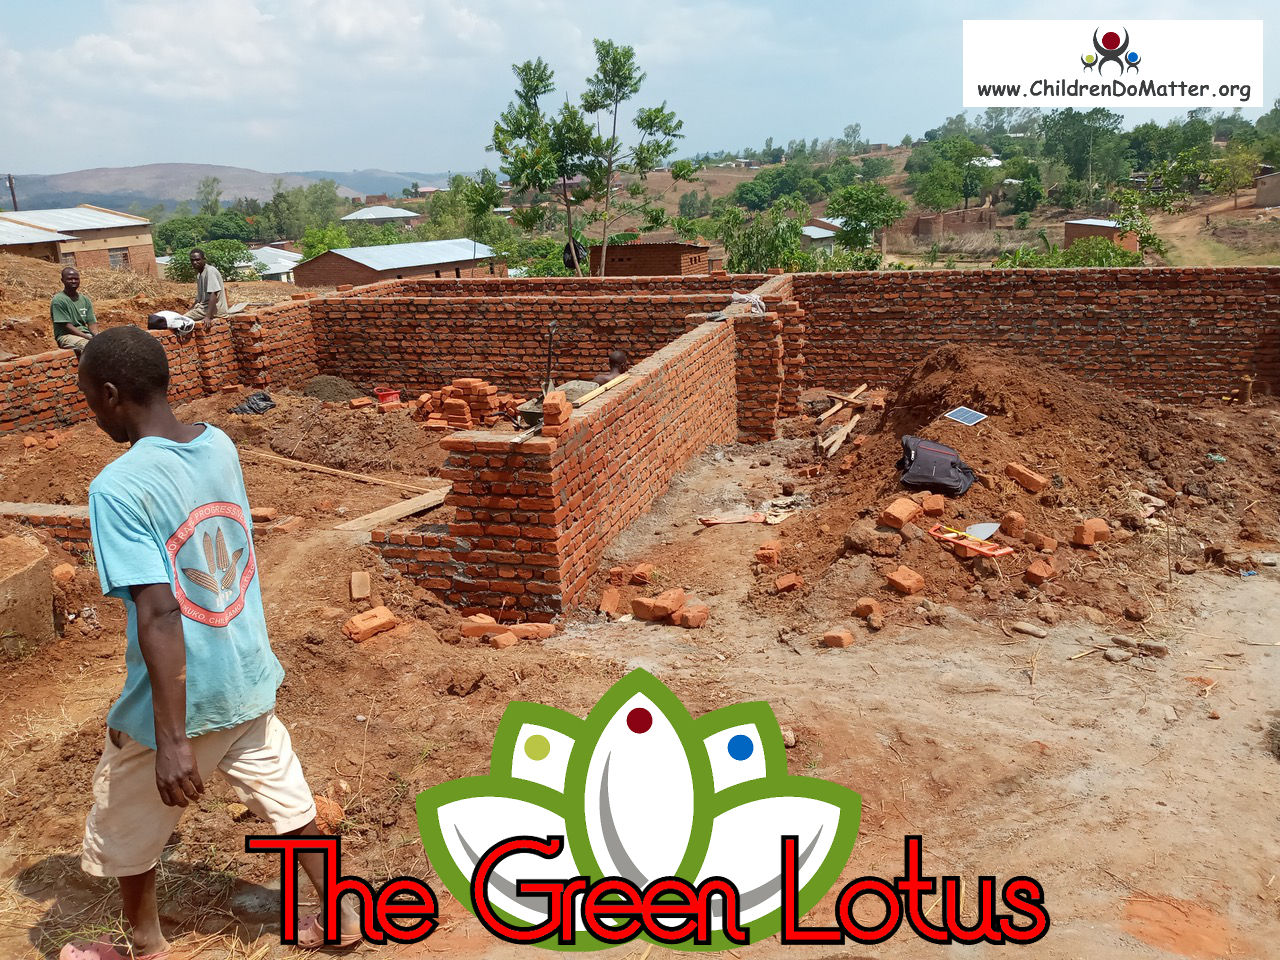 the making of the green lotus orphanage in blantyre malawi - children do matter - 5